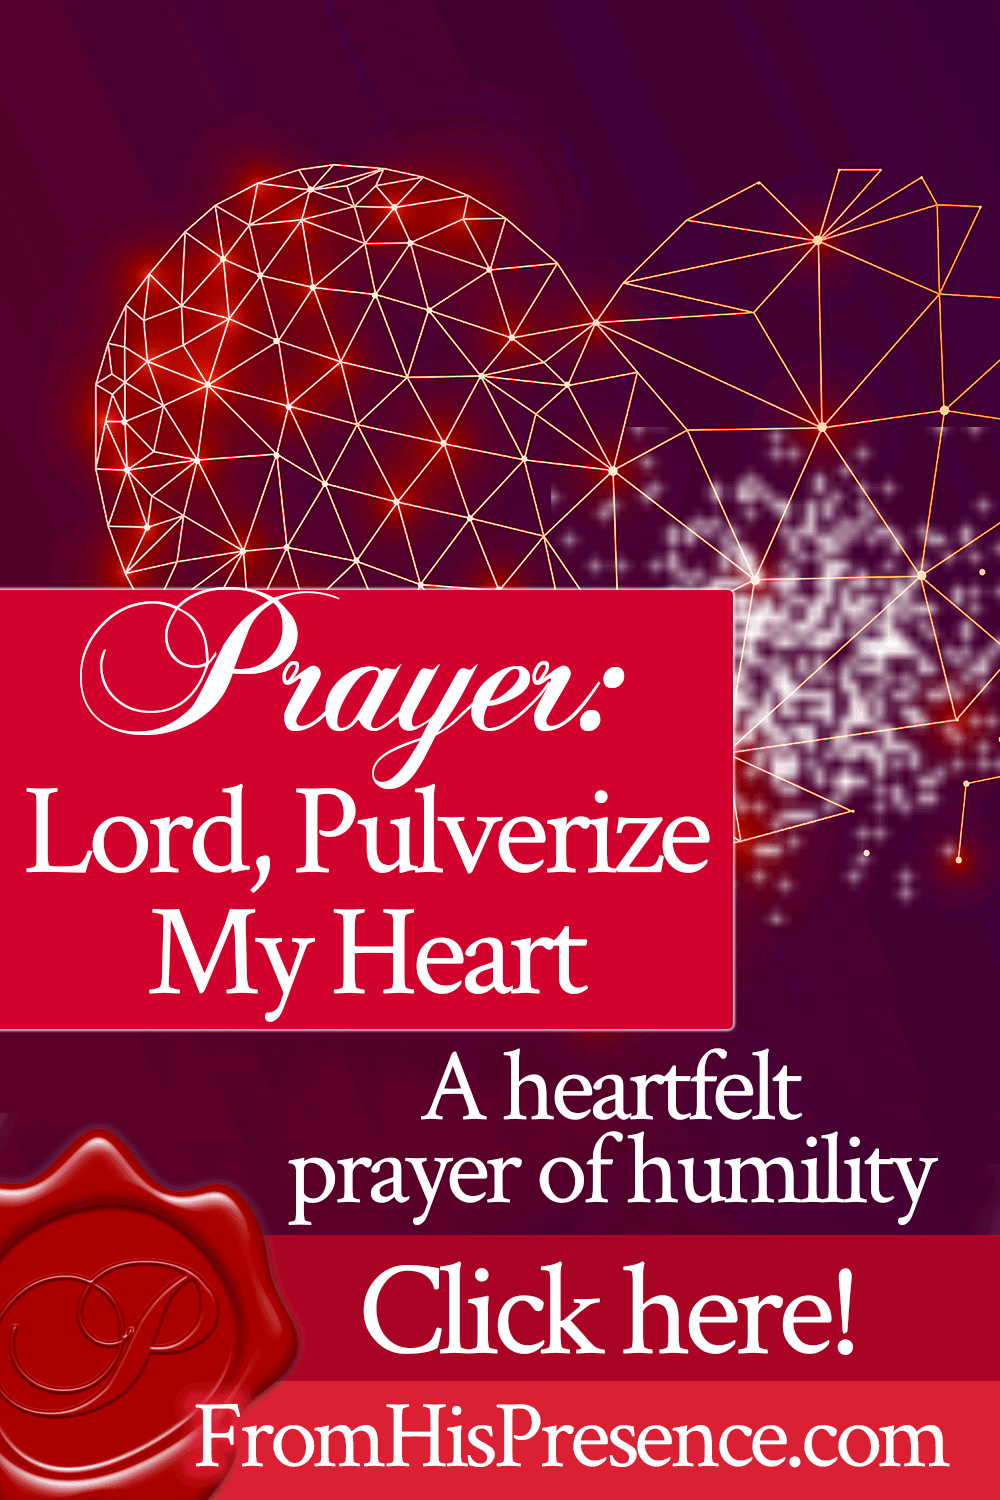 Prayer: Lord, Pulverize My Heart | by Jamie Rohrbaugh | FromHisPresence.com